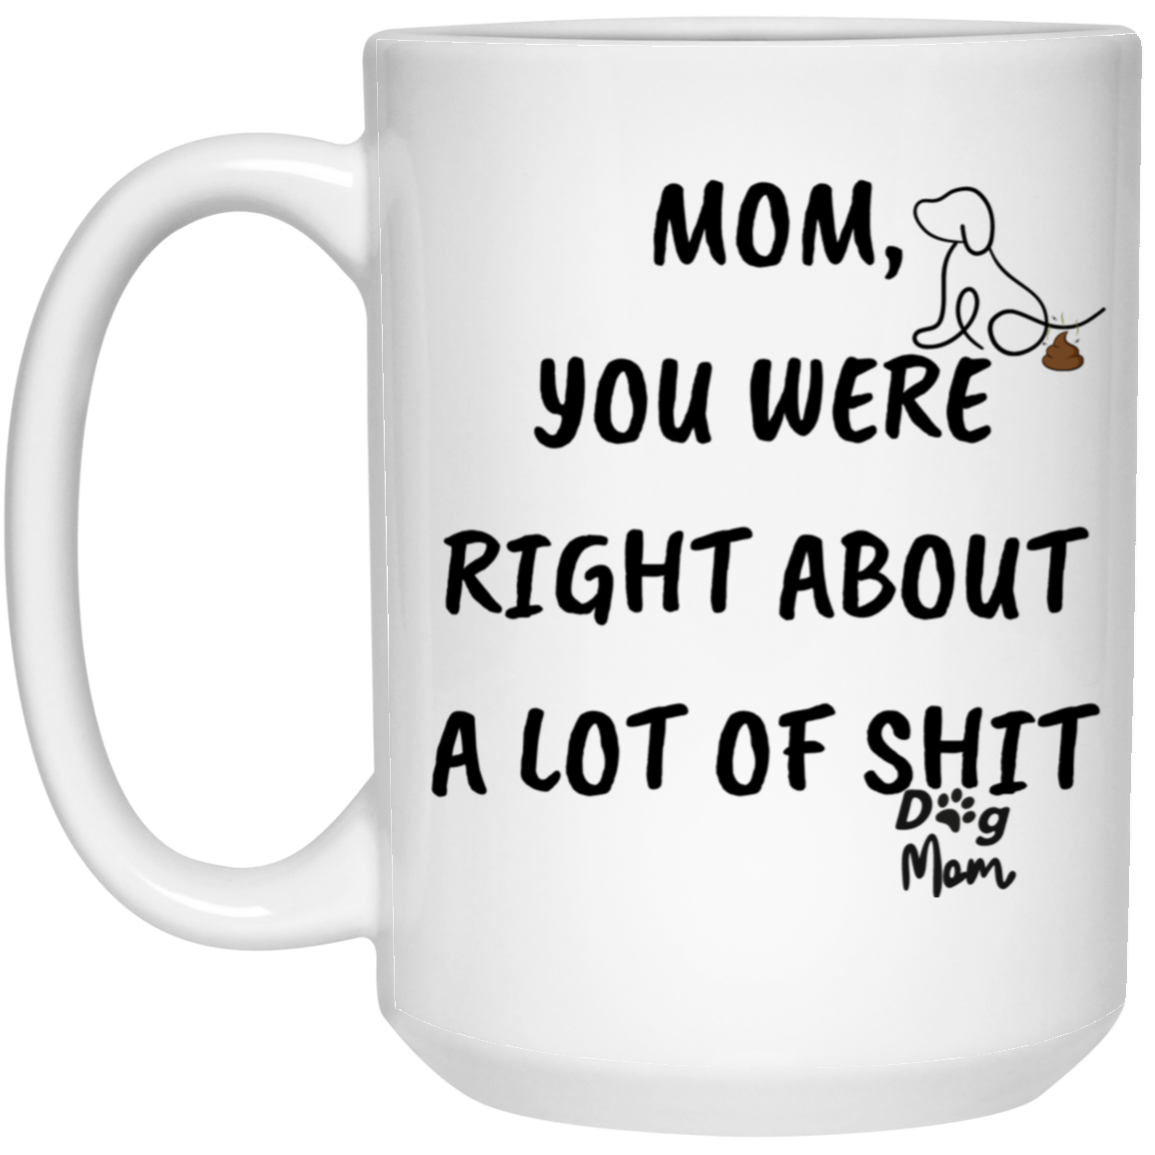 Dog mom | Right About A Lot Of Shit | 15oz Mug w/poop